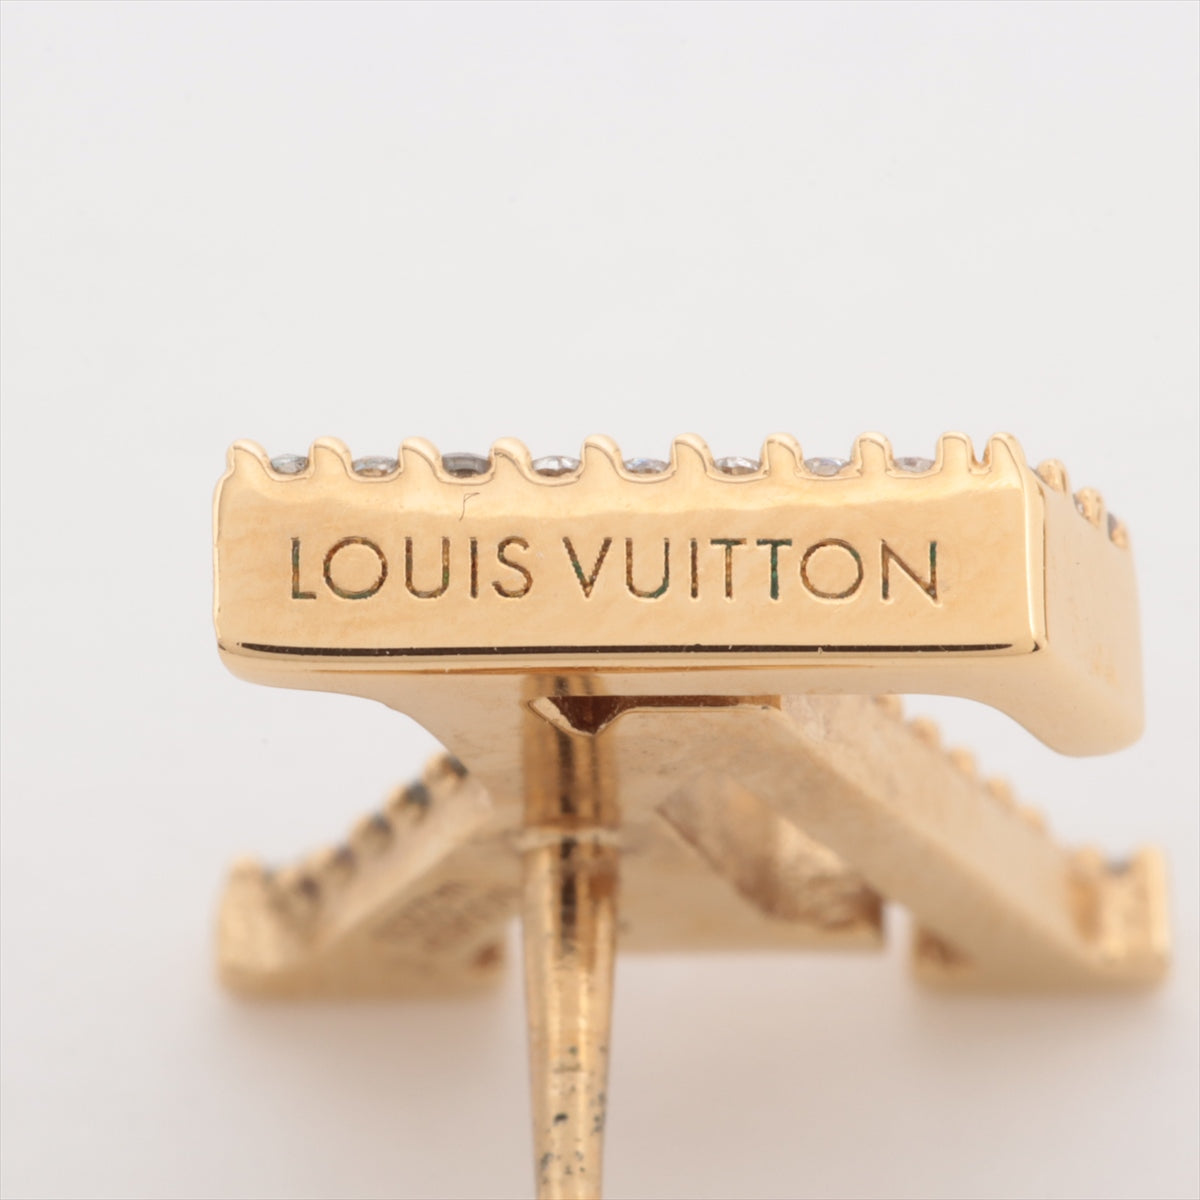 Louis Vuitton M00609 BOOKLE Dreil LV Iconic Strass VA2203 Piercing jewelry (for both ears) GP×inestone Gold